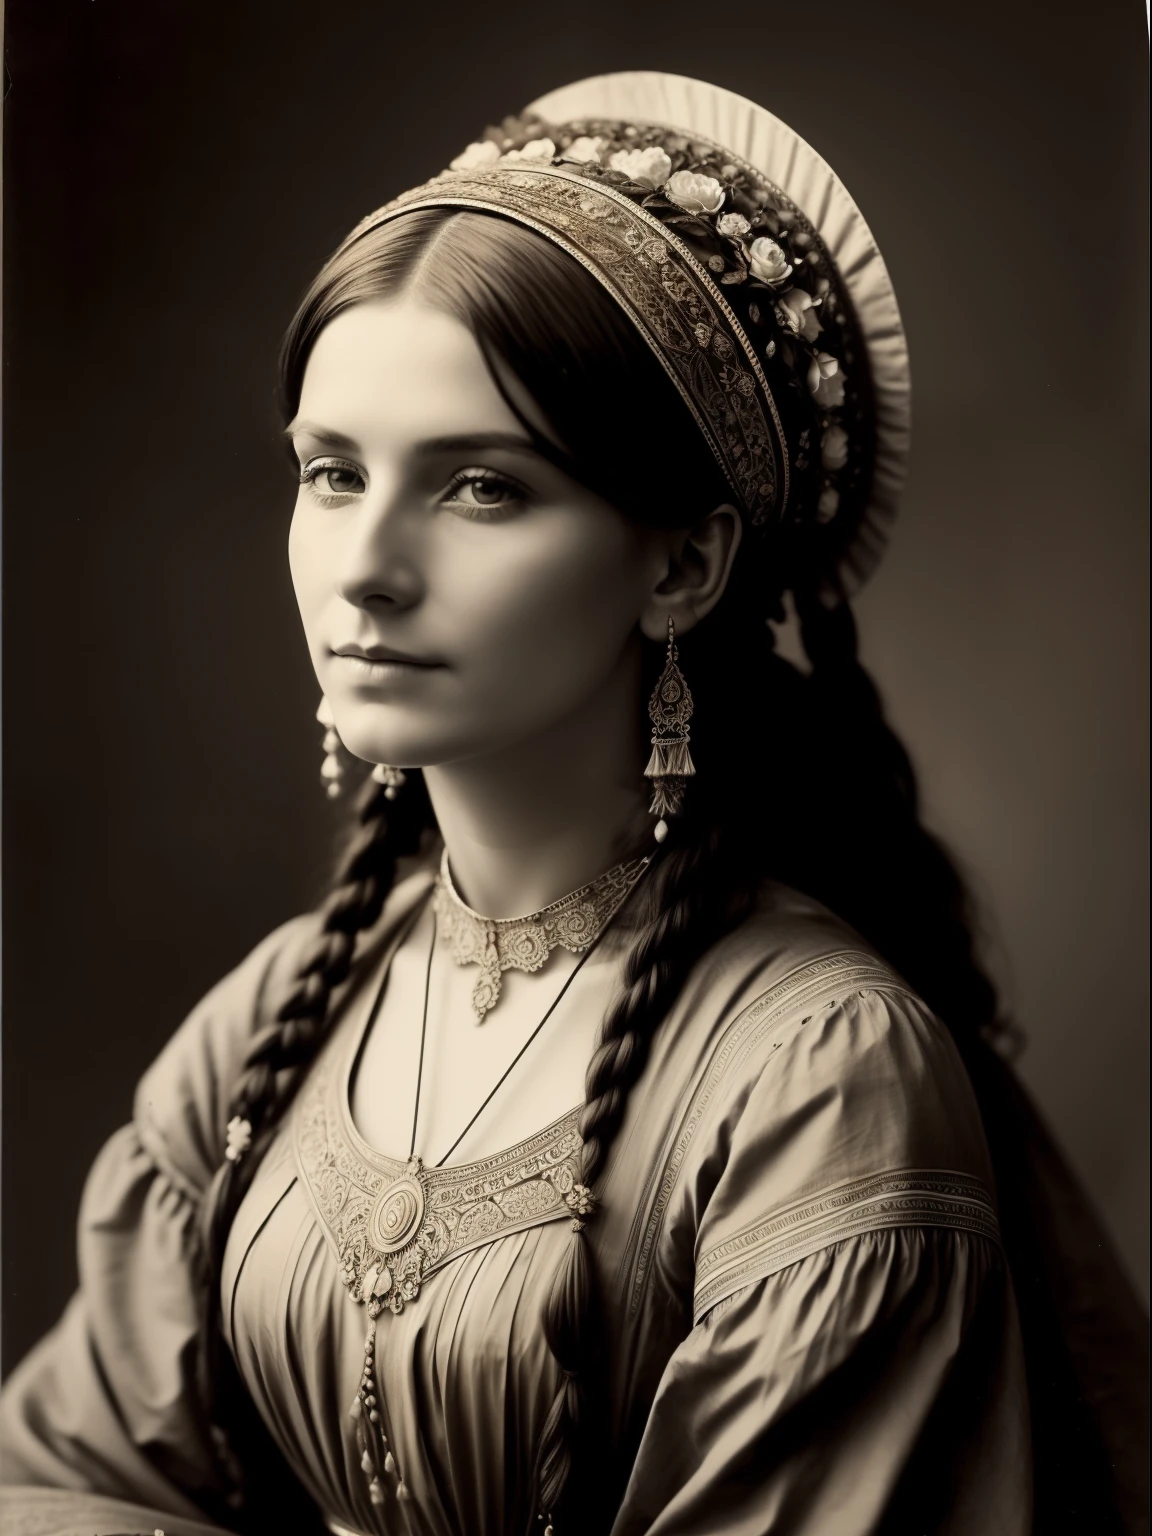 (Masterpiece) An insanely beautiful Victorian lady nomad with rich flowering headdress, vintage sepia photography, very old and torned photo